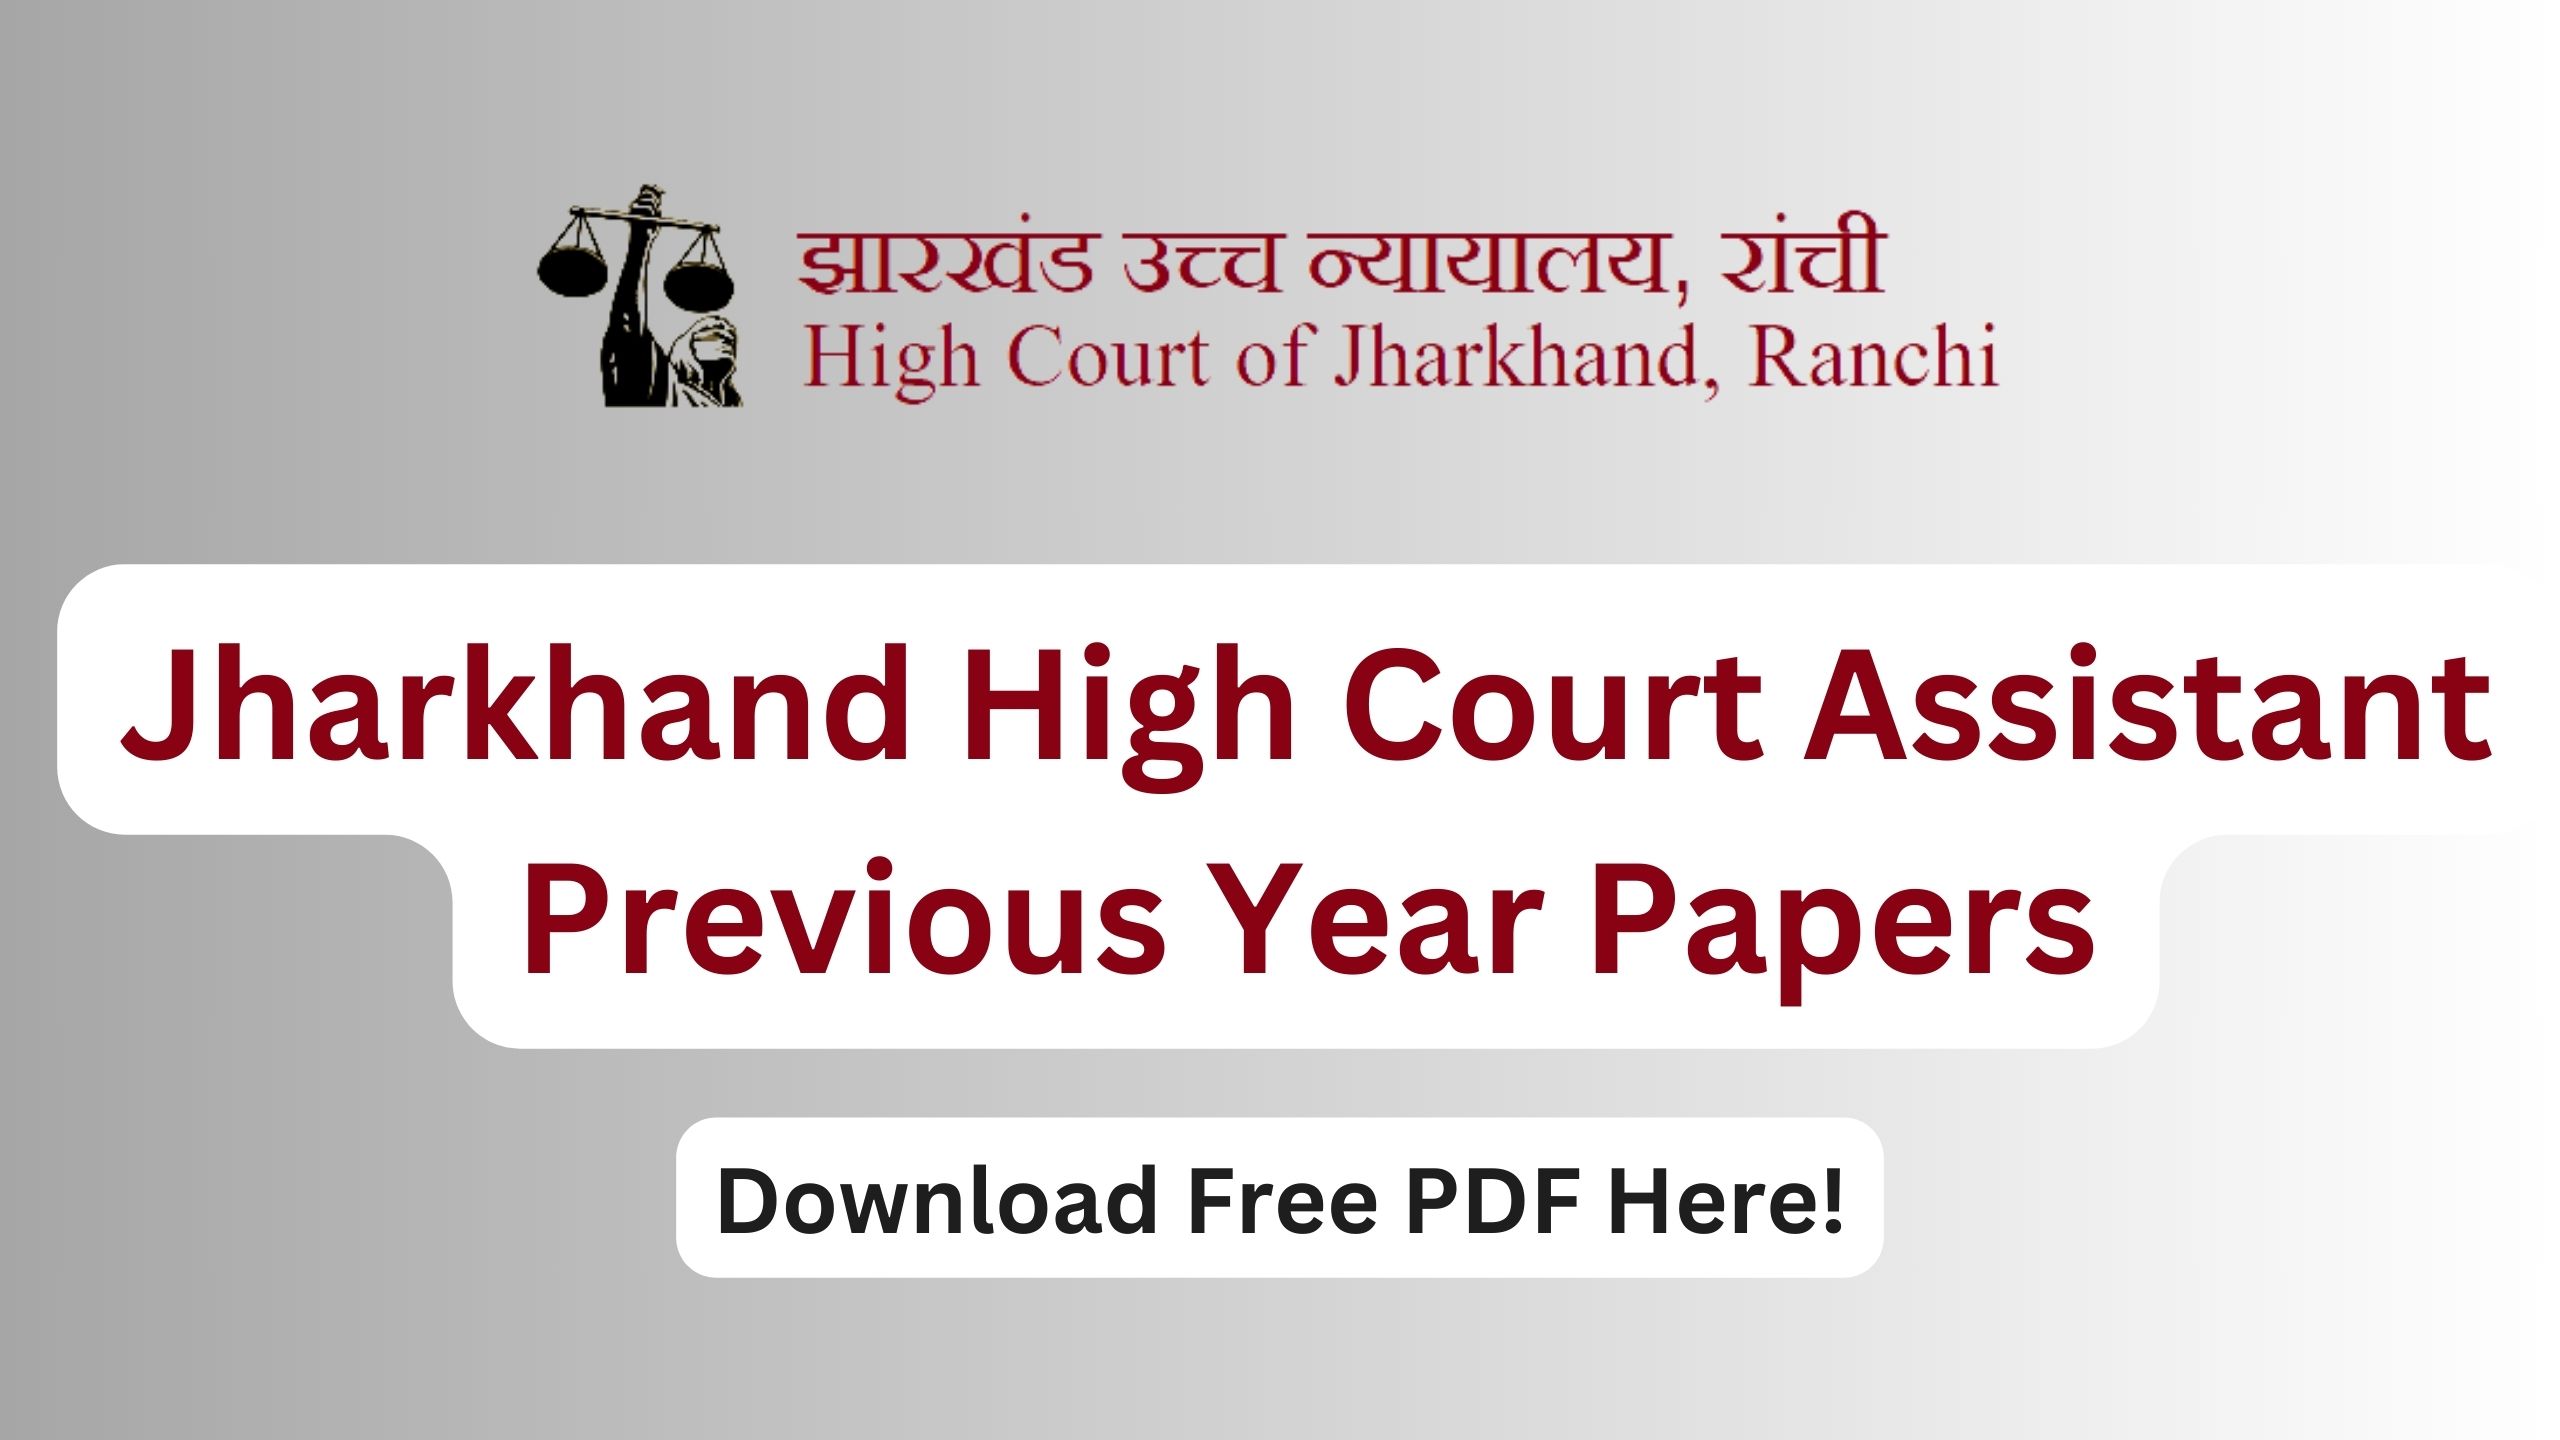 Jharkhand High Court Assistant Previous Year Papers